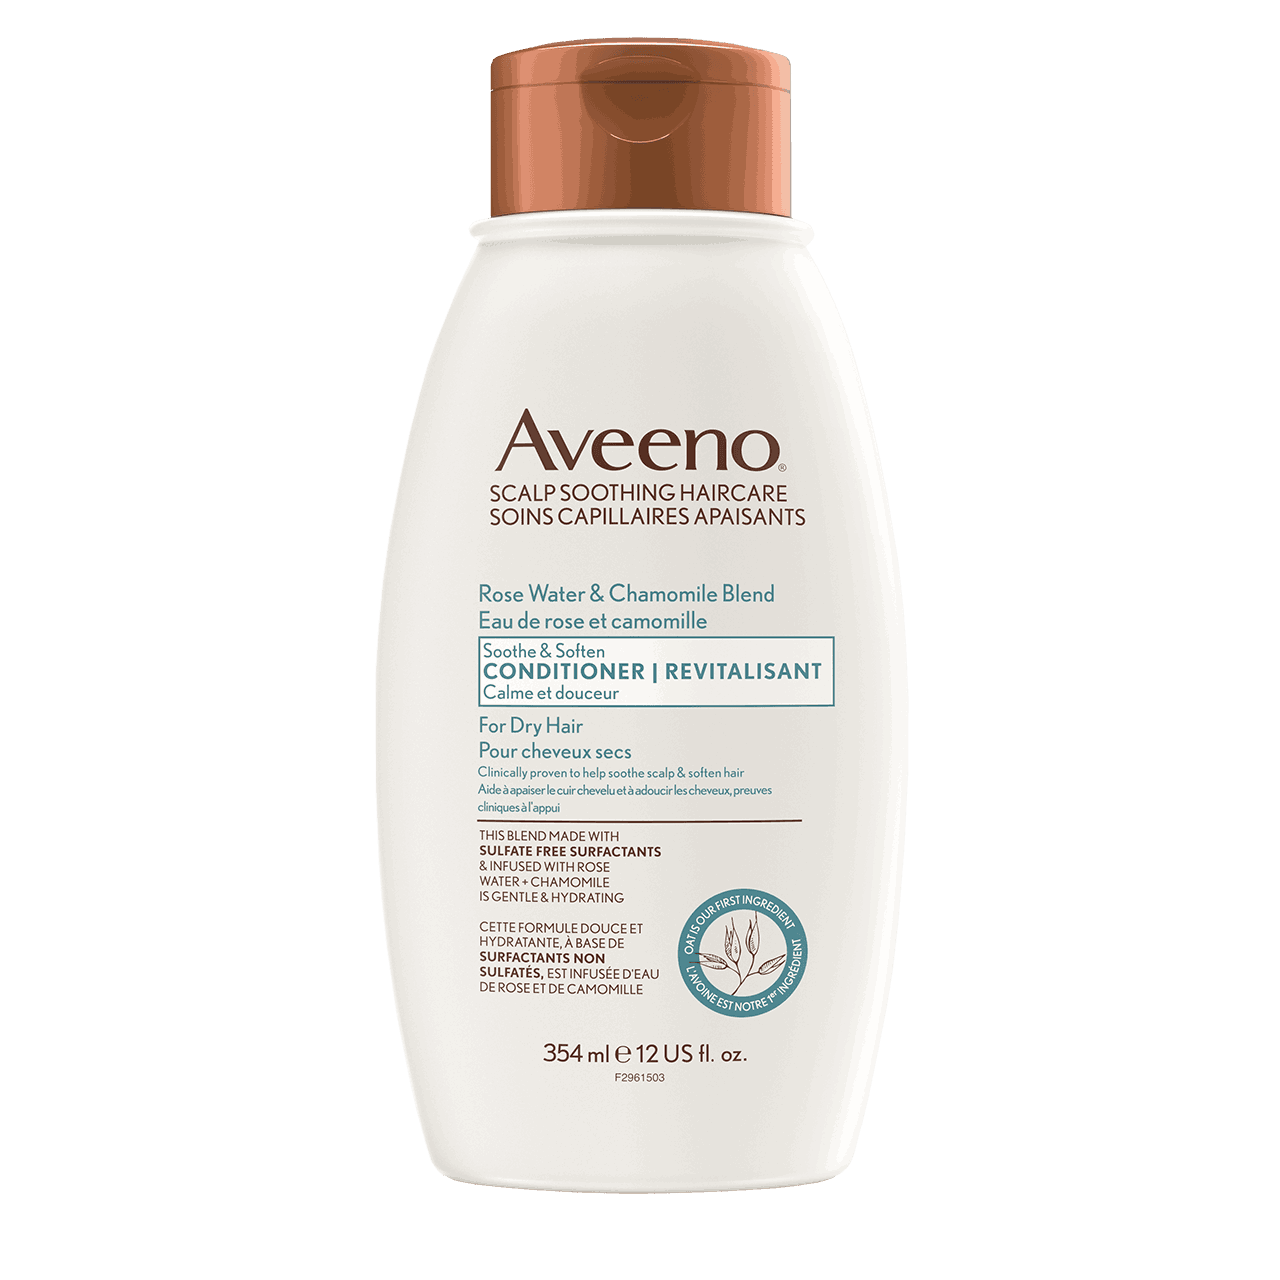 AVEENO® Rose Water & Chamomile Blend Conditioner, 354ml bottle